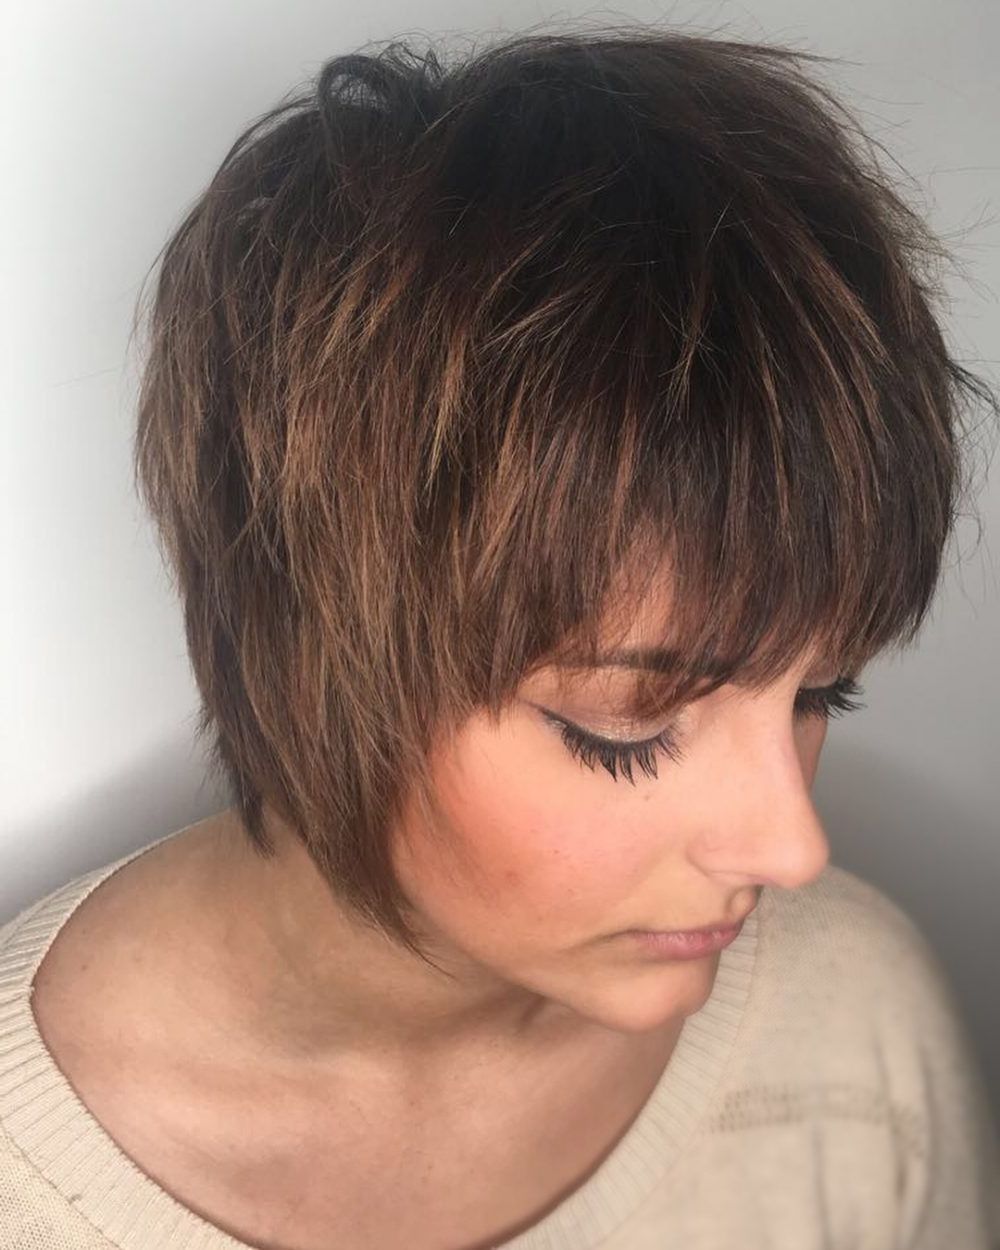 Top 25 Short Shag Haircuts Of 2019 For Shaggy Pixie Haircuts With Bangs (View 8 of 20)